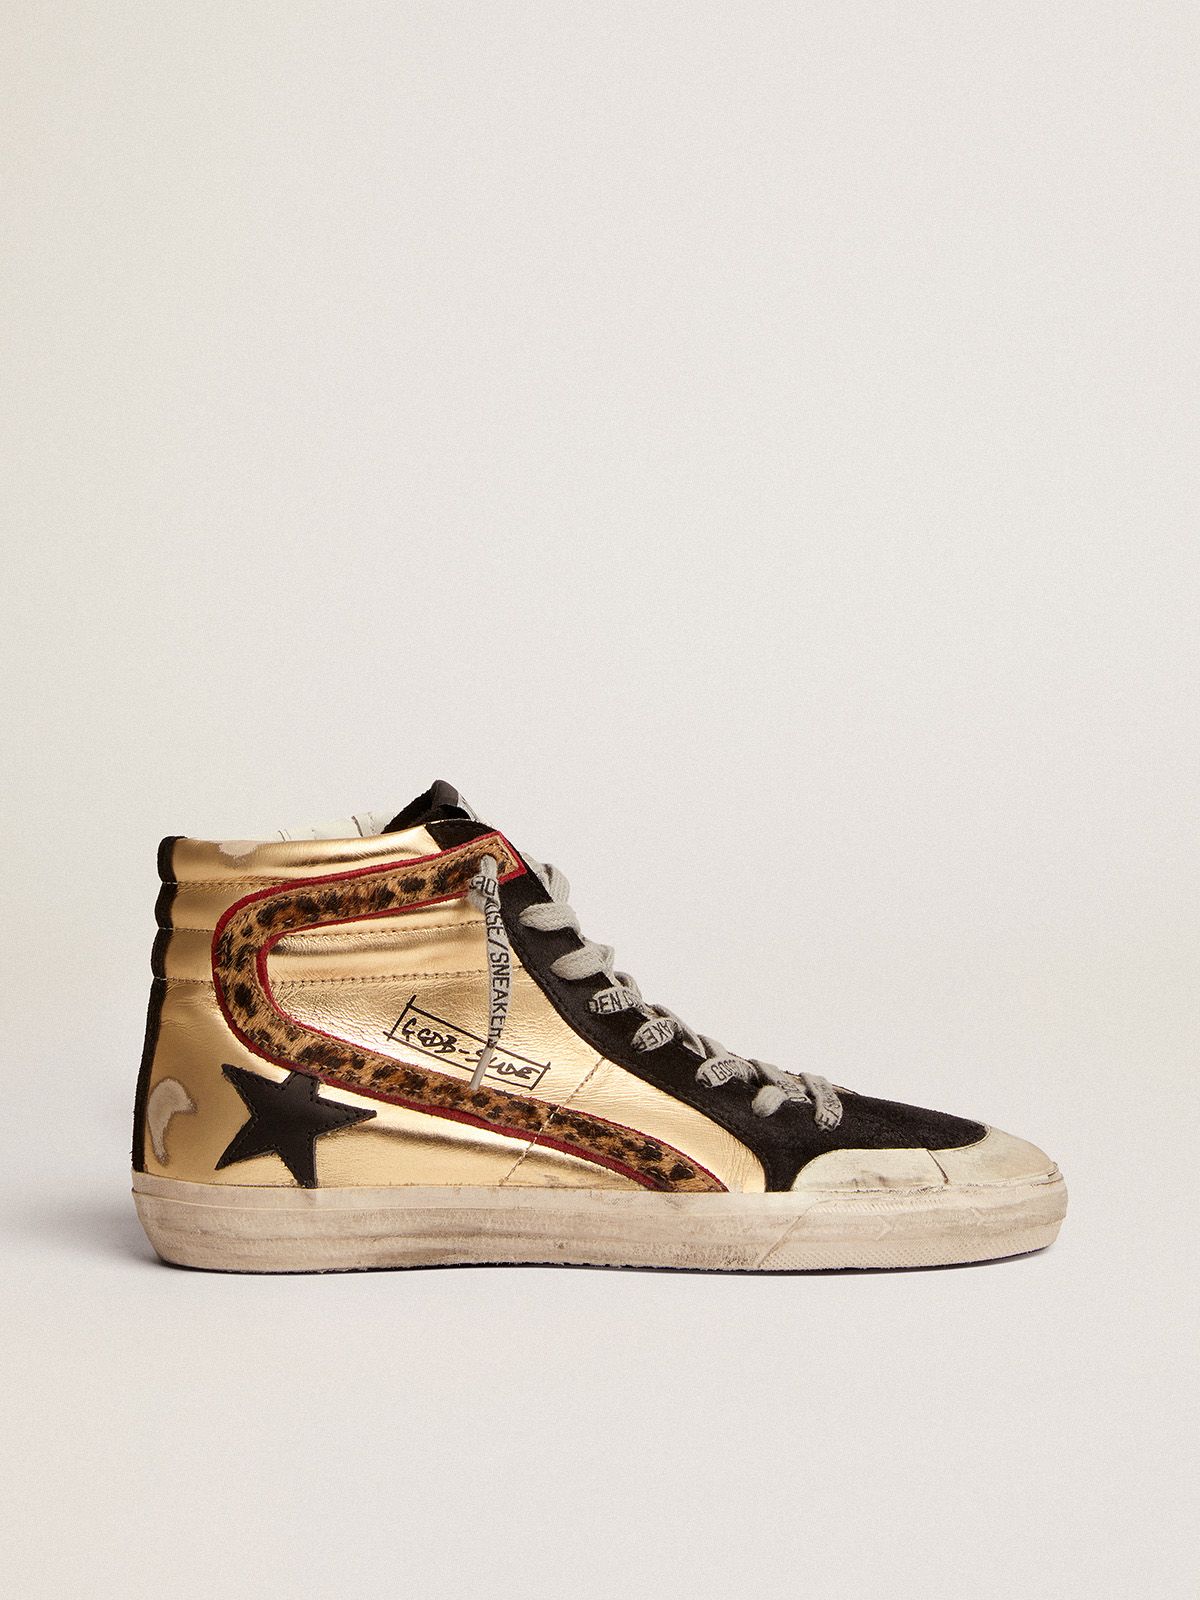 Golden Goose Bambina Penstar Slide sneakers in gold leather with black leather star and leopard-print pony skin insert